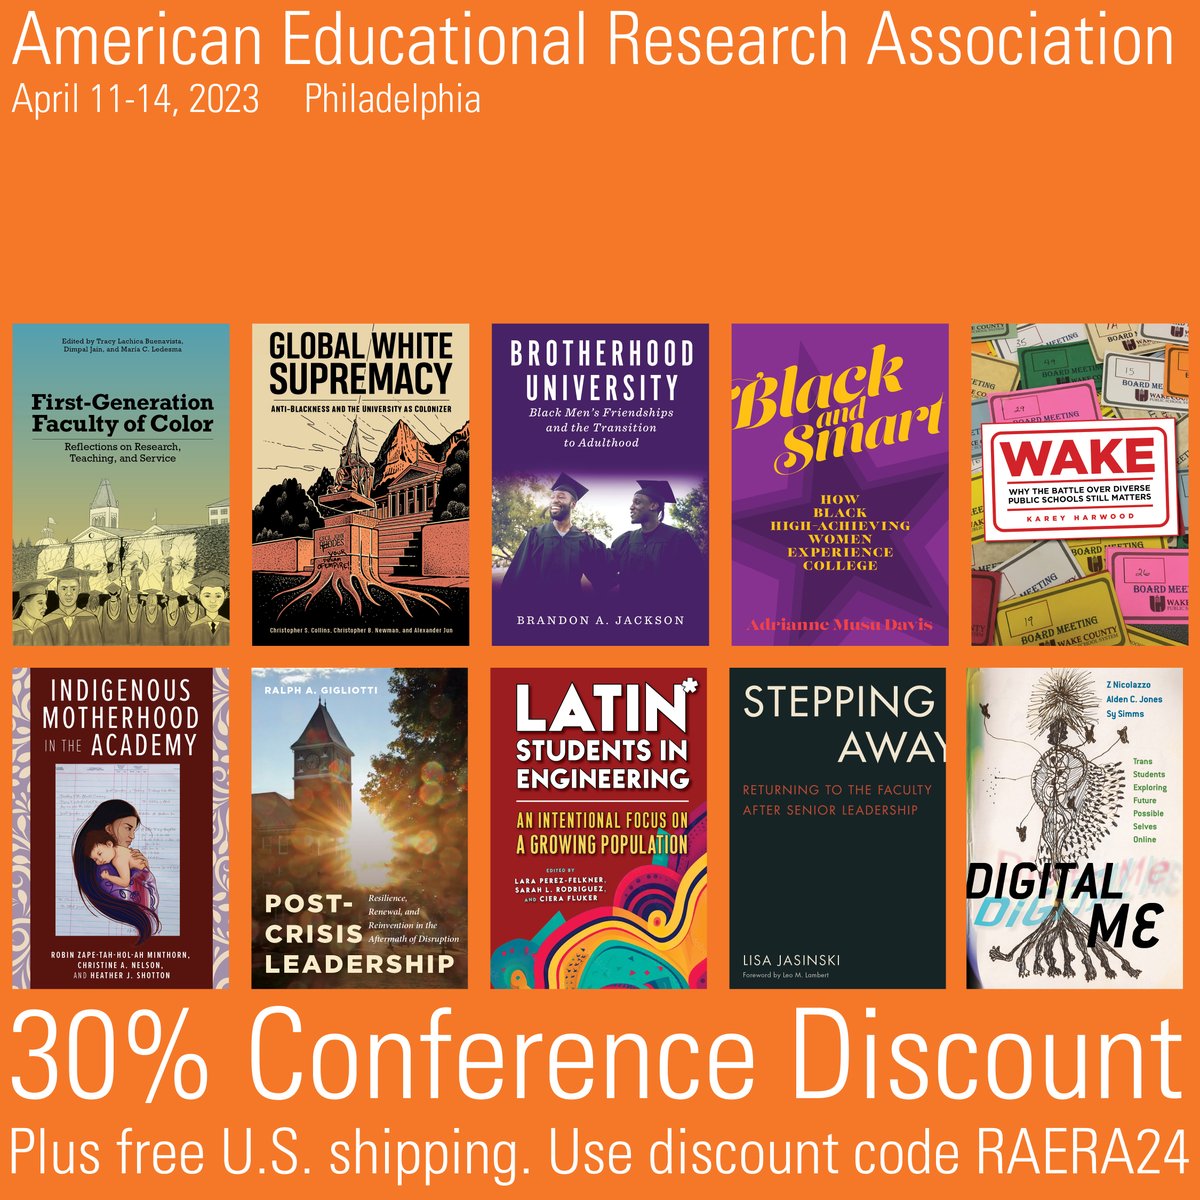 Visit us at the American Educational Research Associations conference. Take advantage of our 30 % conference discount (with free U.S. shipping). Use code RAERA24. rutgersuniversitypress.org/american-educa… #AERA24 #Education